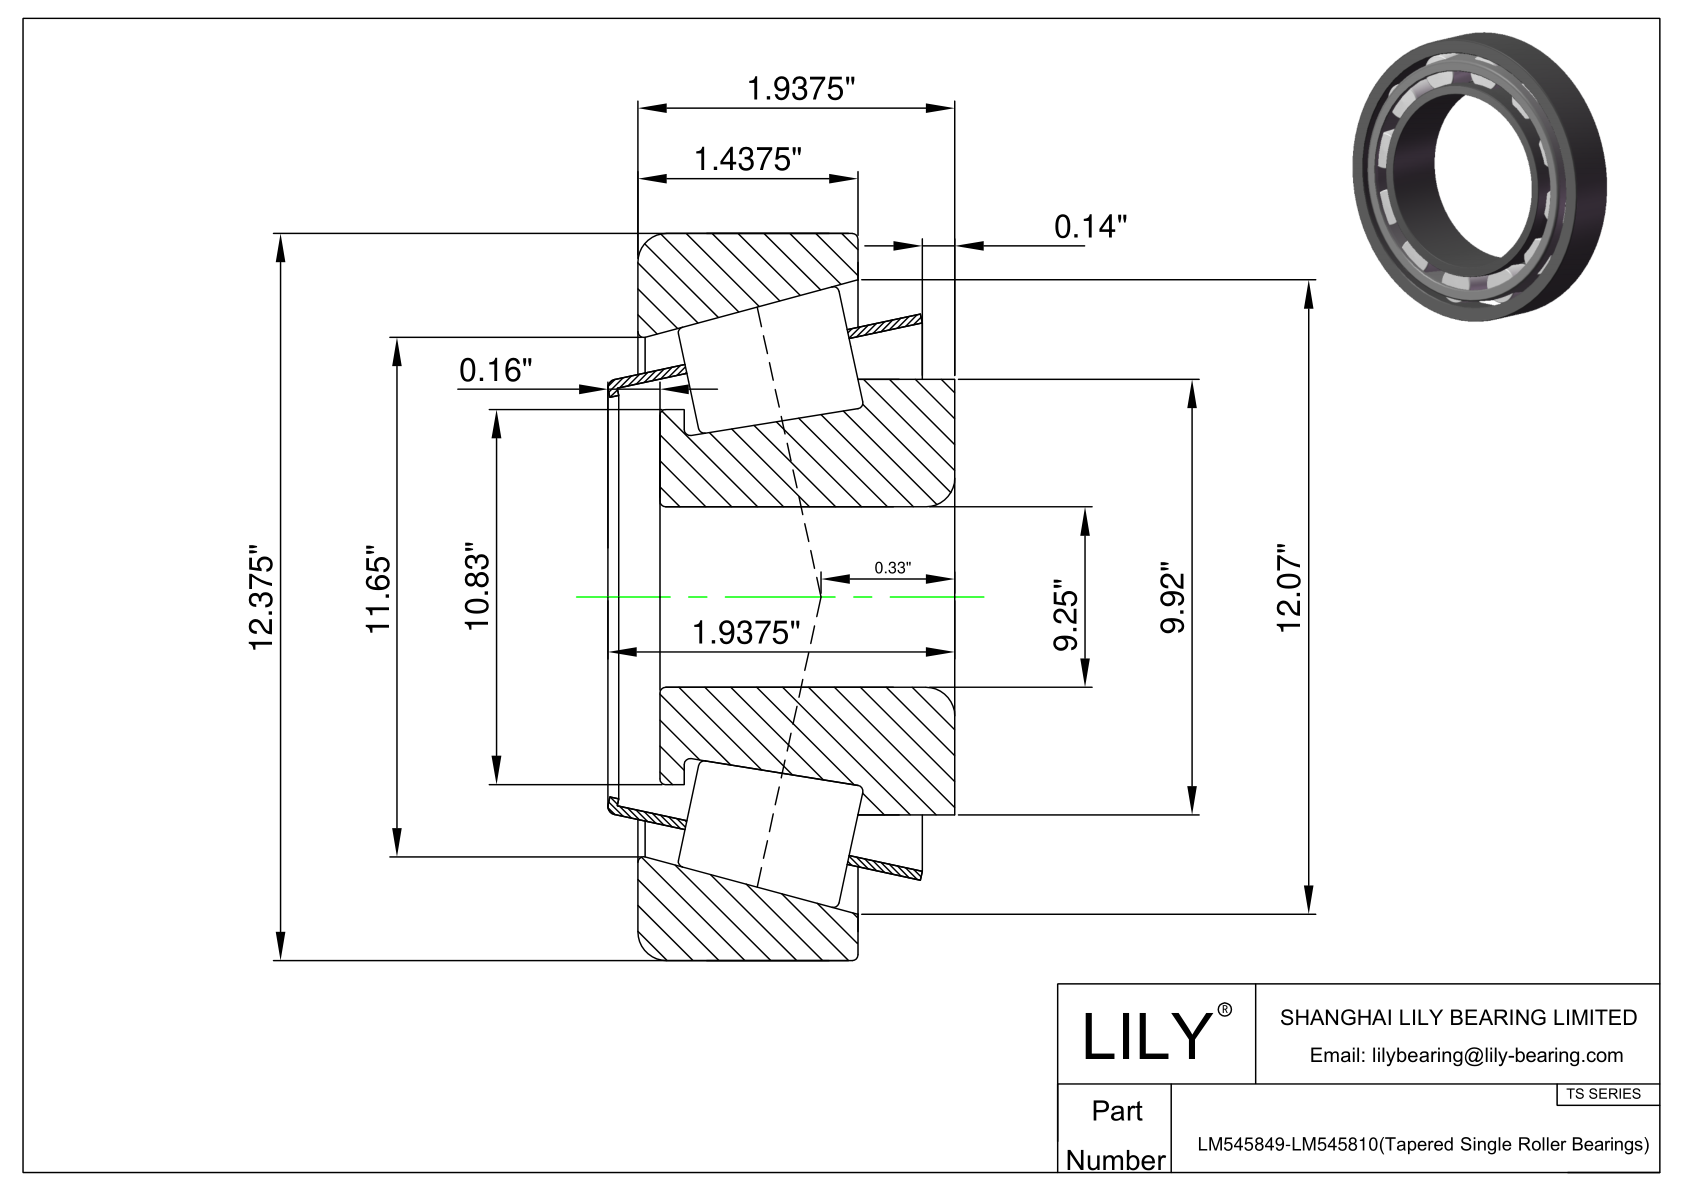 LM545849-LM545810 TS (Tapered Single Roller Bearings) (Imperial) cad drawing